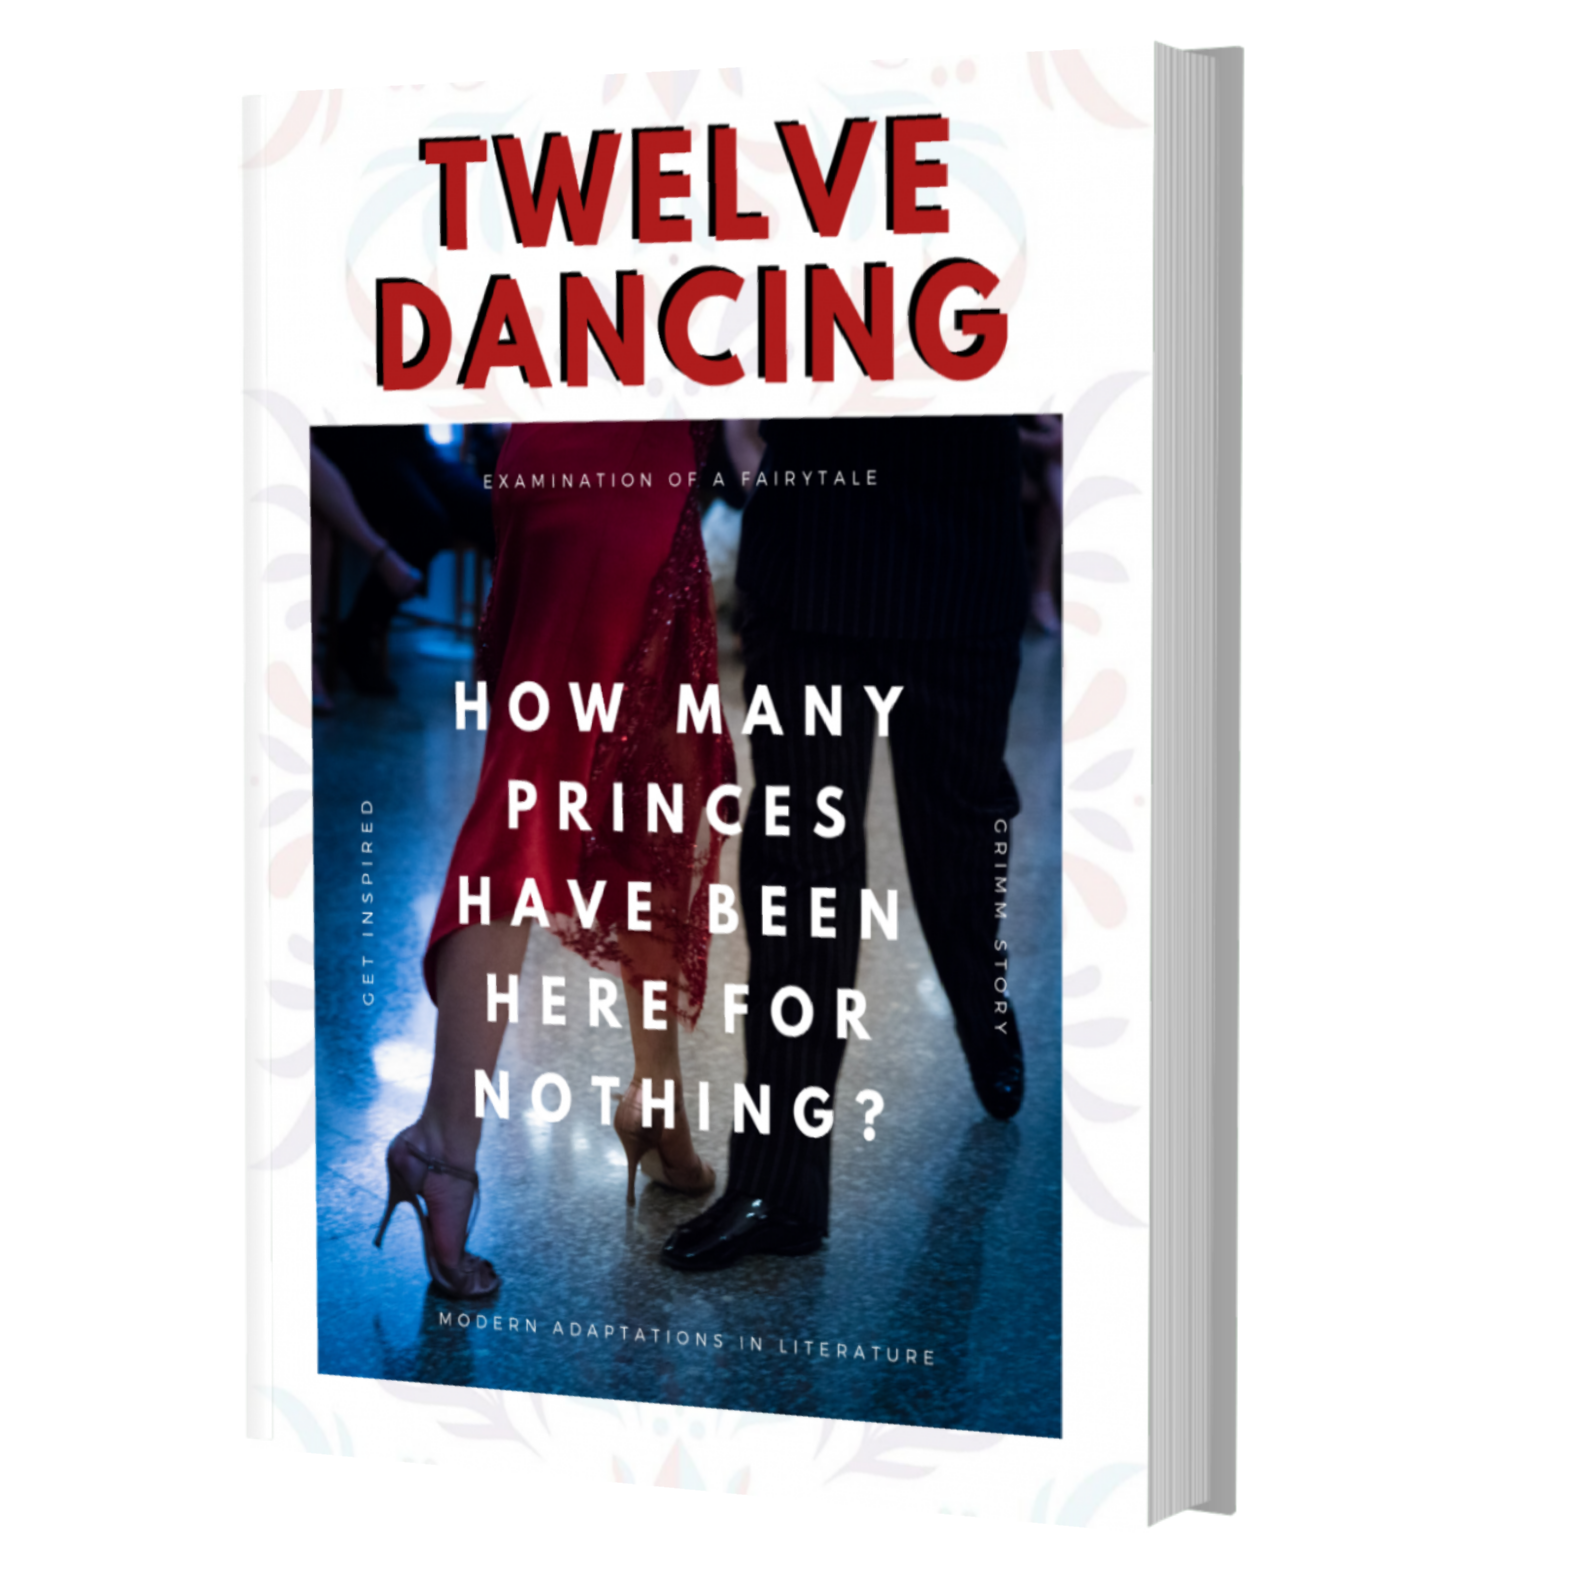 A mock book cover for the 12 Dancing examinations of a fairytale ebook